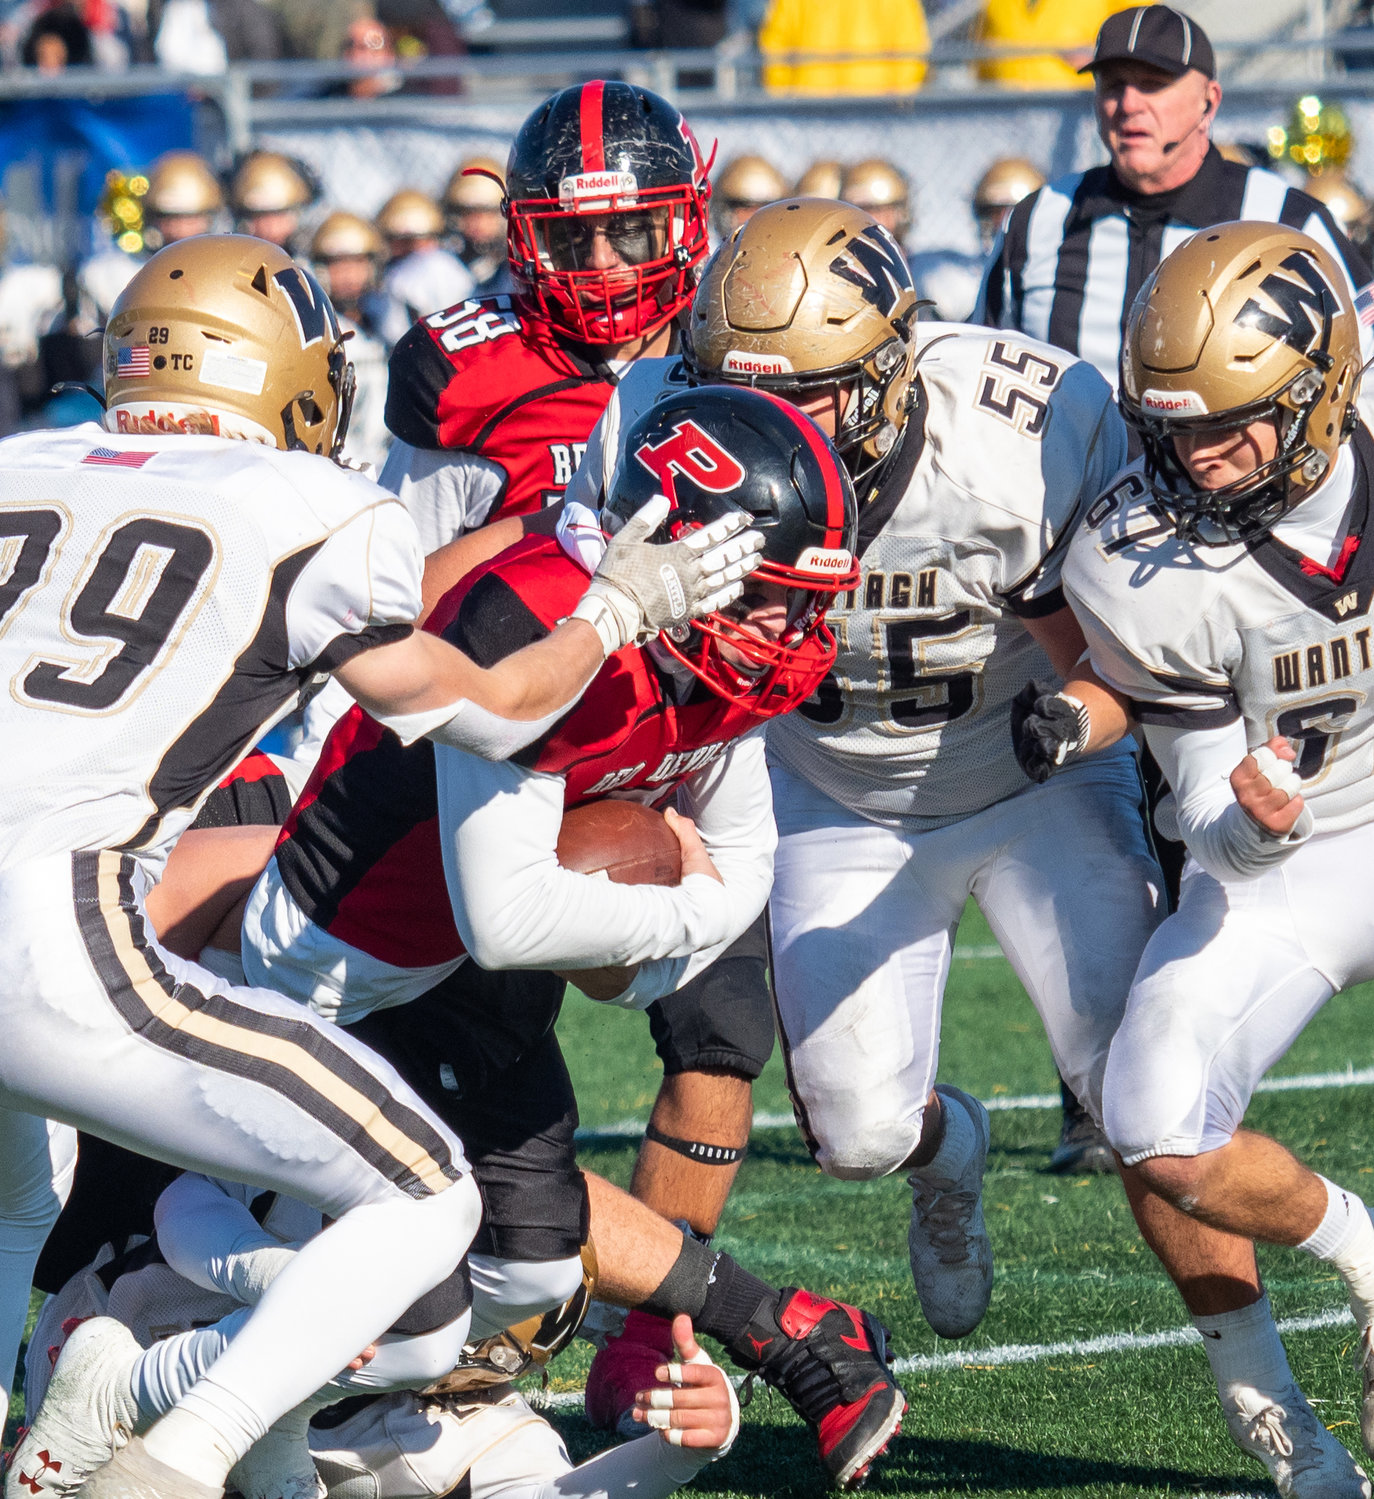 Wantagh’s defense was unable to bottle up Plainedge in last Saturday’s Conference III championship game.